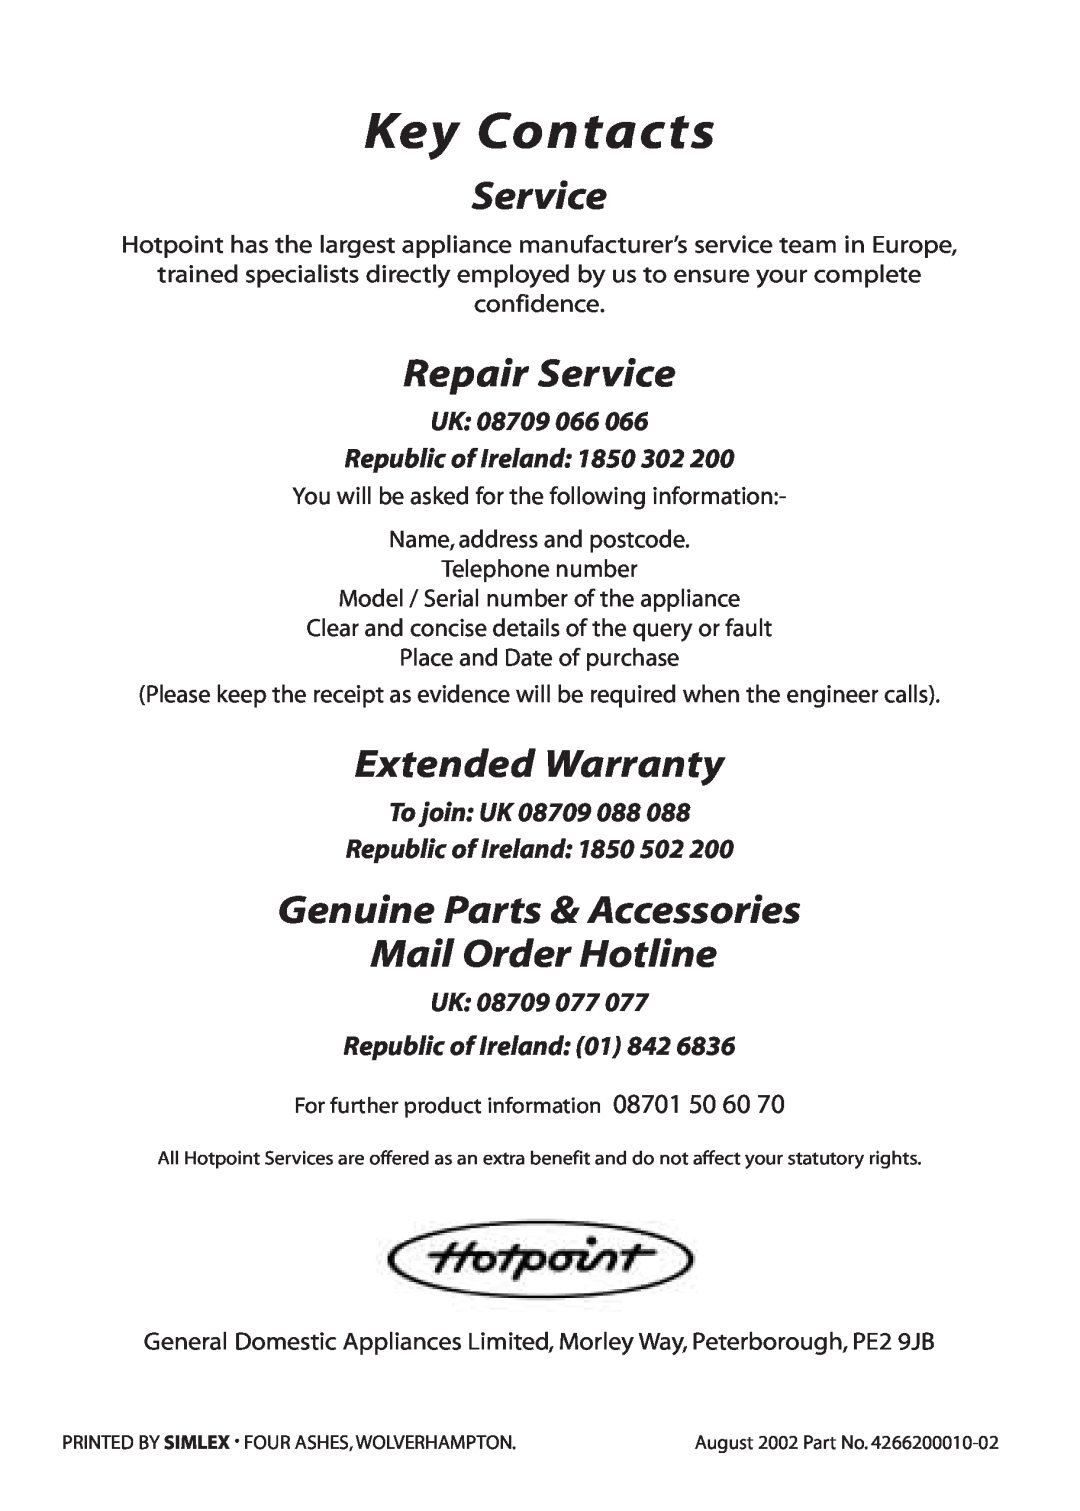 Hotpoint BE32 manual Key Contacts, Repair Service, Extended Warranty, Genuine Parts & Accessories Mail Order Hotline 